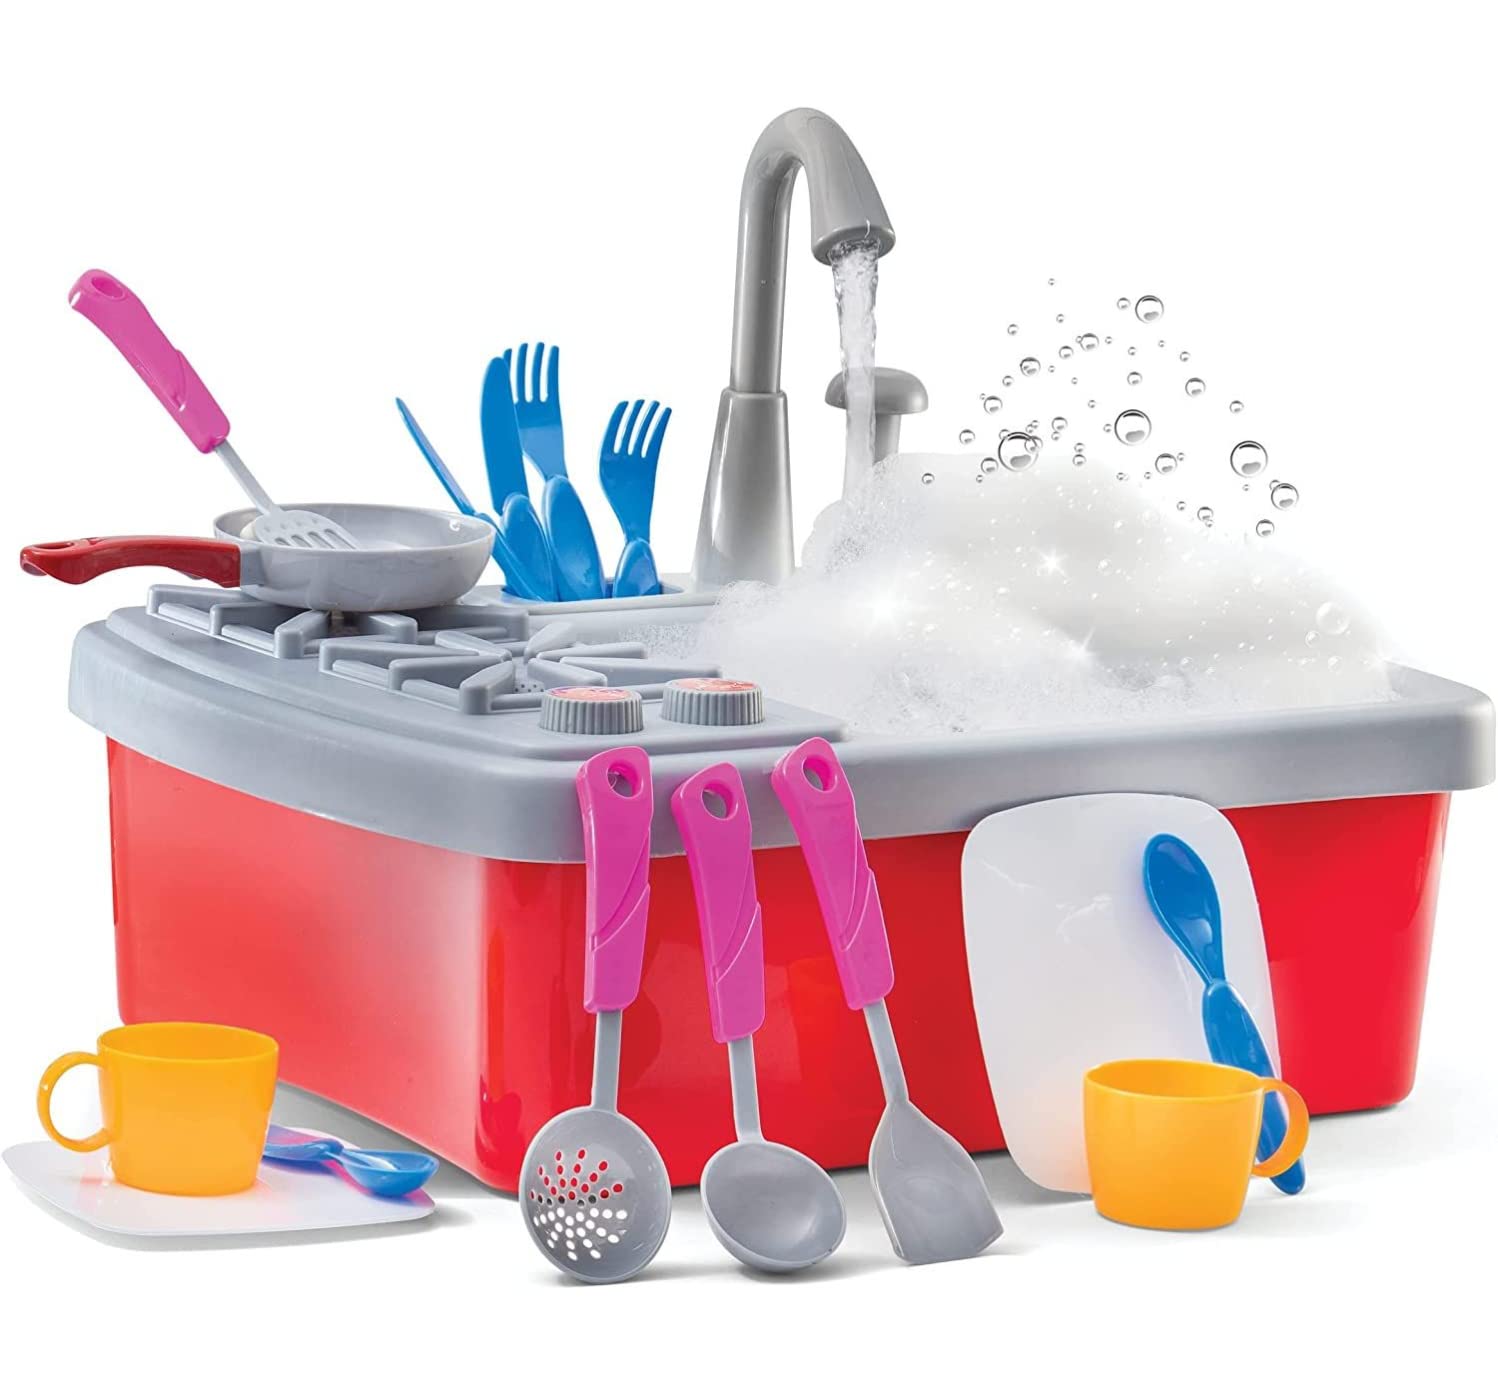 Book Cover Play22 17 Pc Kids Play Sink with Running Water - Kitchen Sink Toy - Toddler Sink Toy with Real Faucet & Drain, Dishes, Utensils - Play Cooking Stove W/Pan - Kitchen Toys for Toddlers & Kids